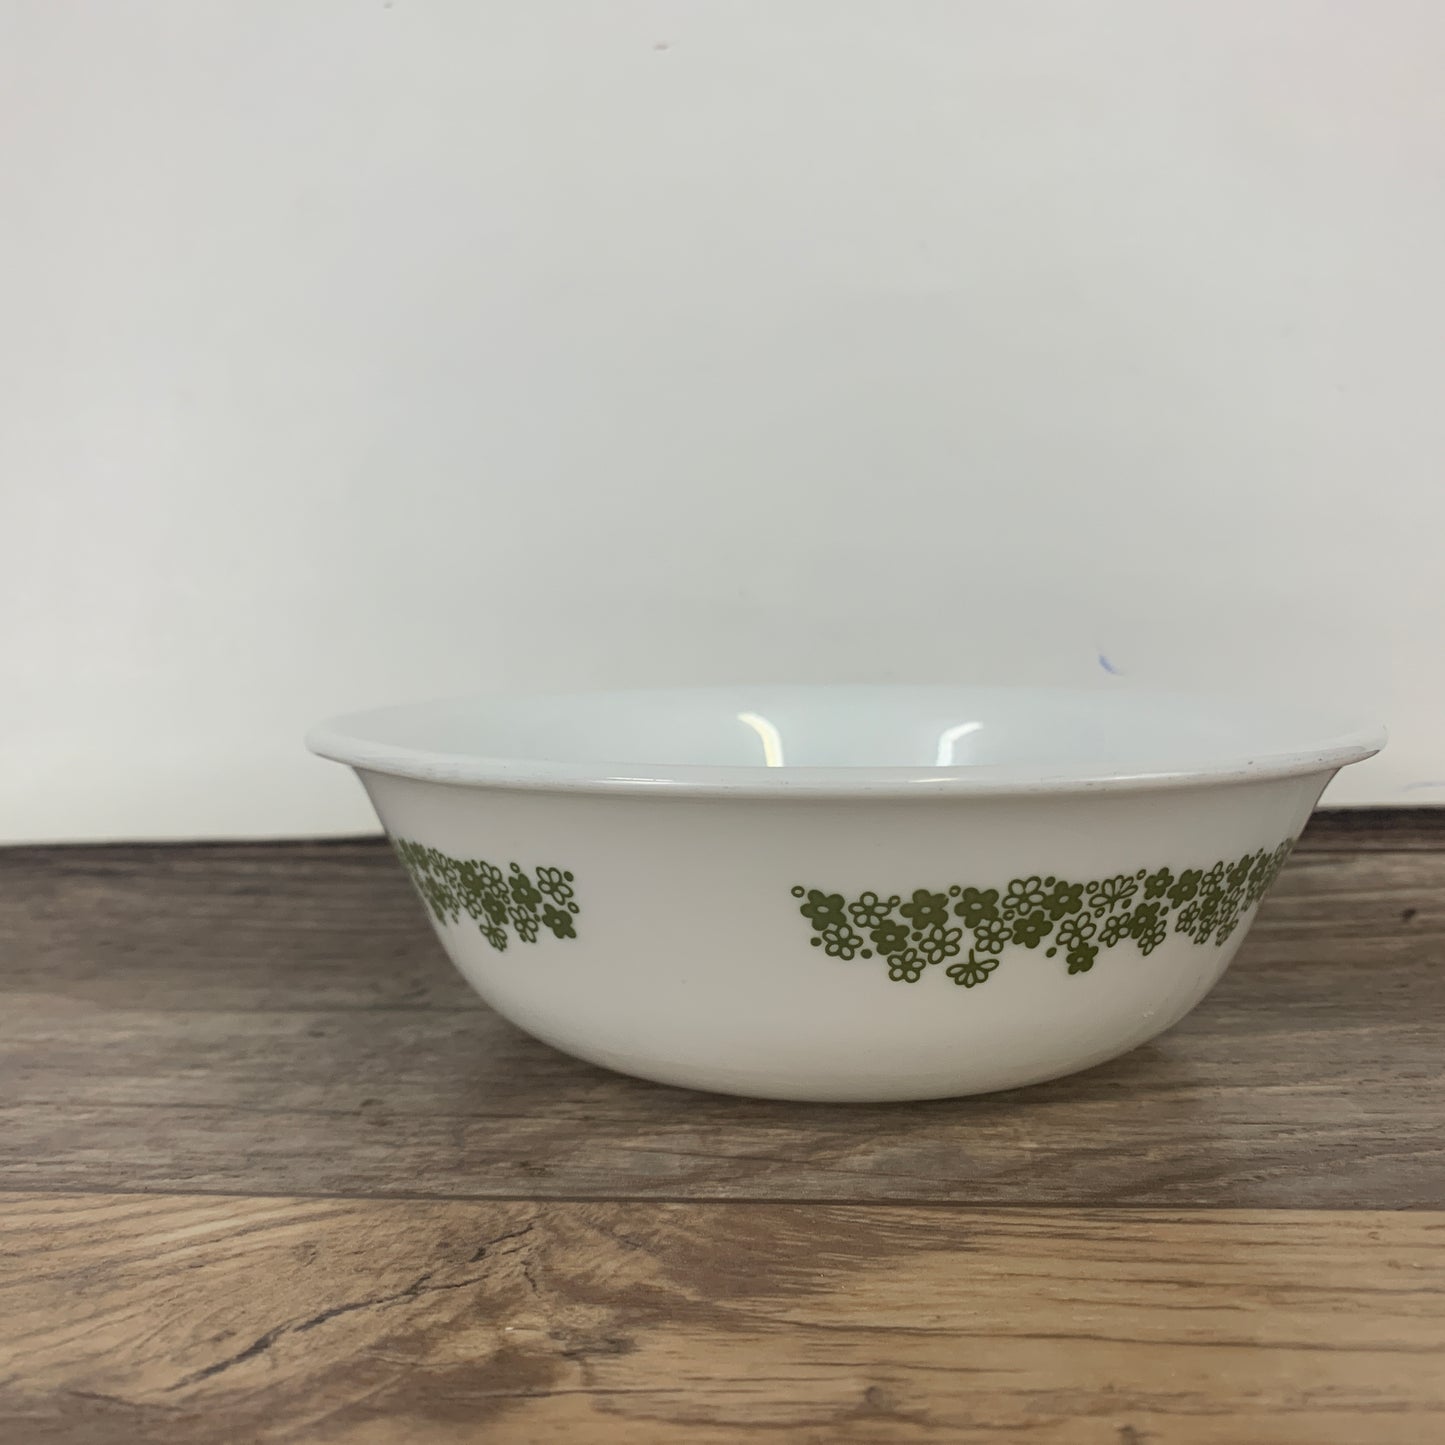 Corelle Spring Blossom Bowls, Crazy Daisy Pattern, Green and White Vintage Cereal Bowls